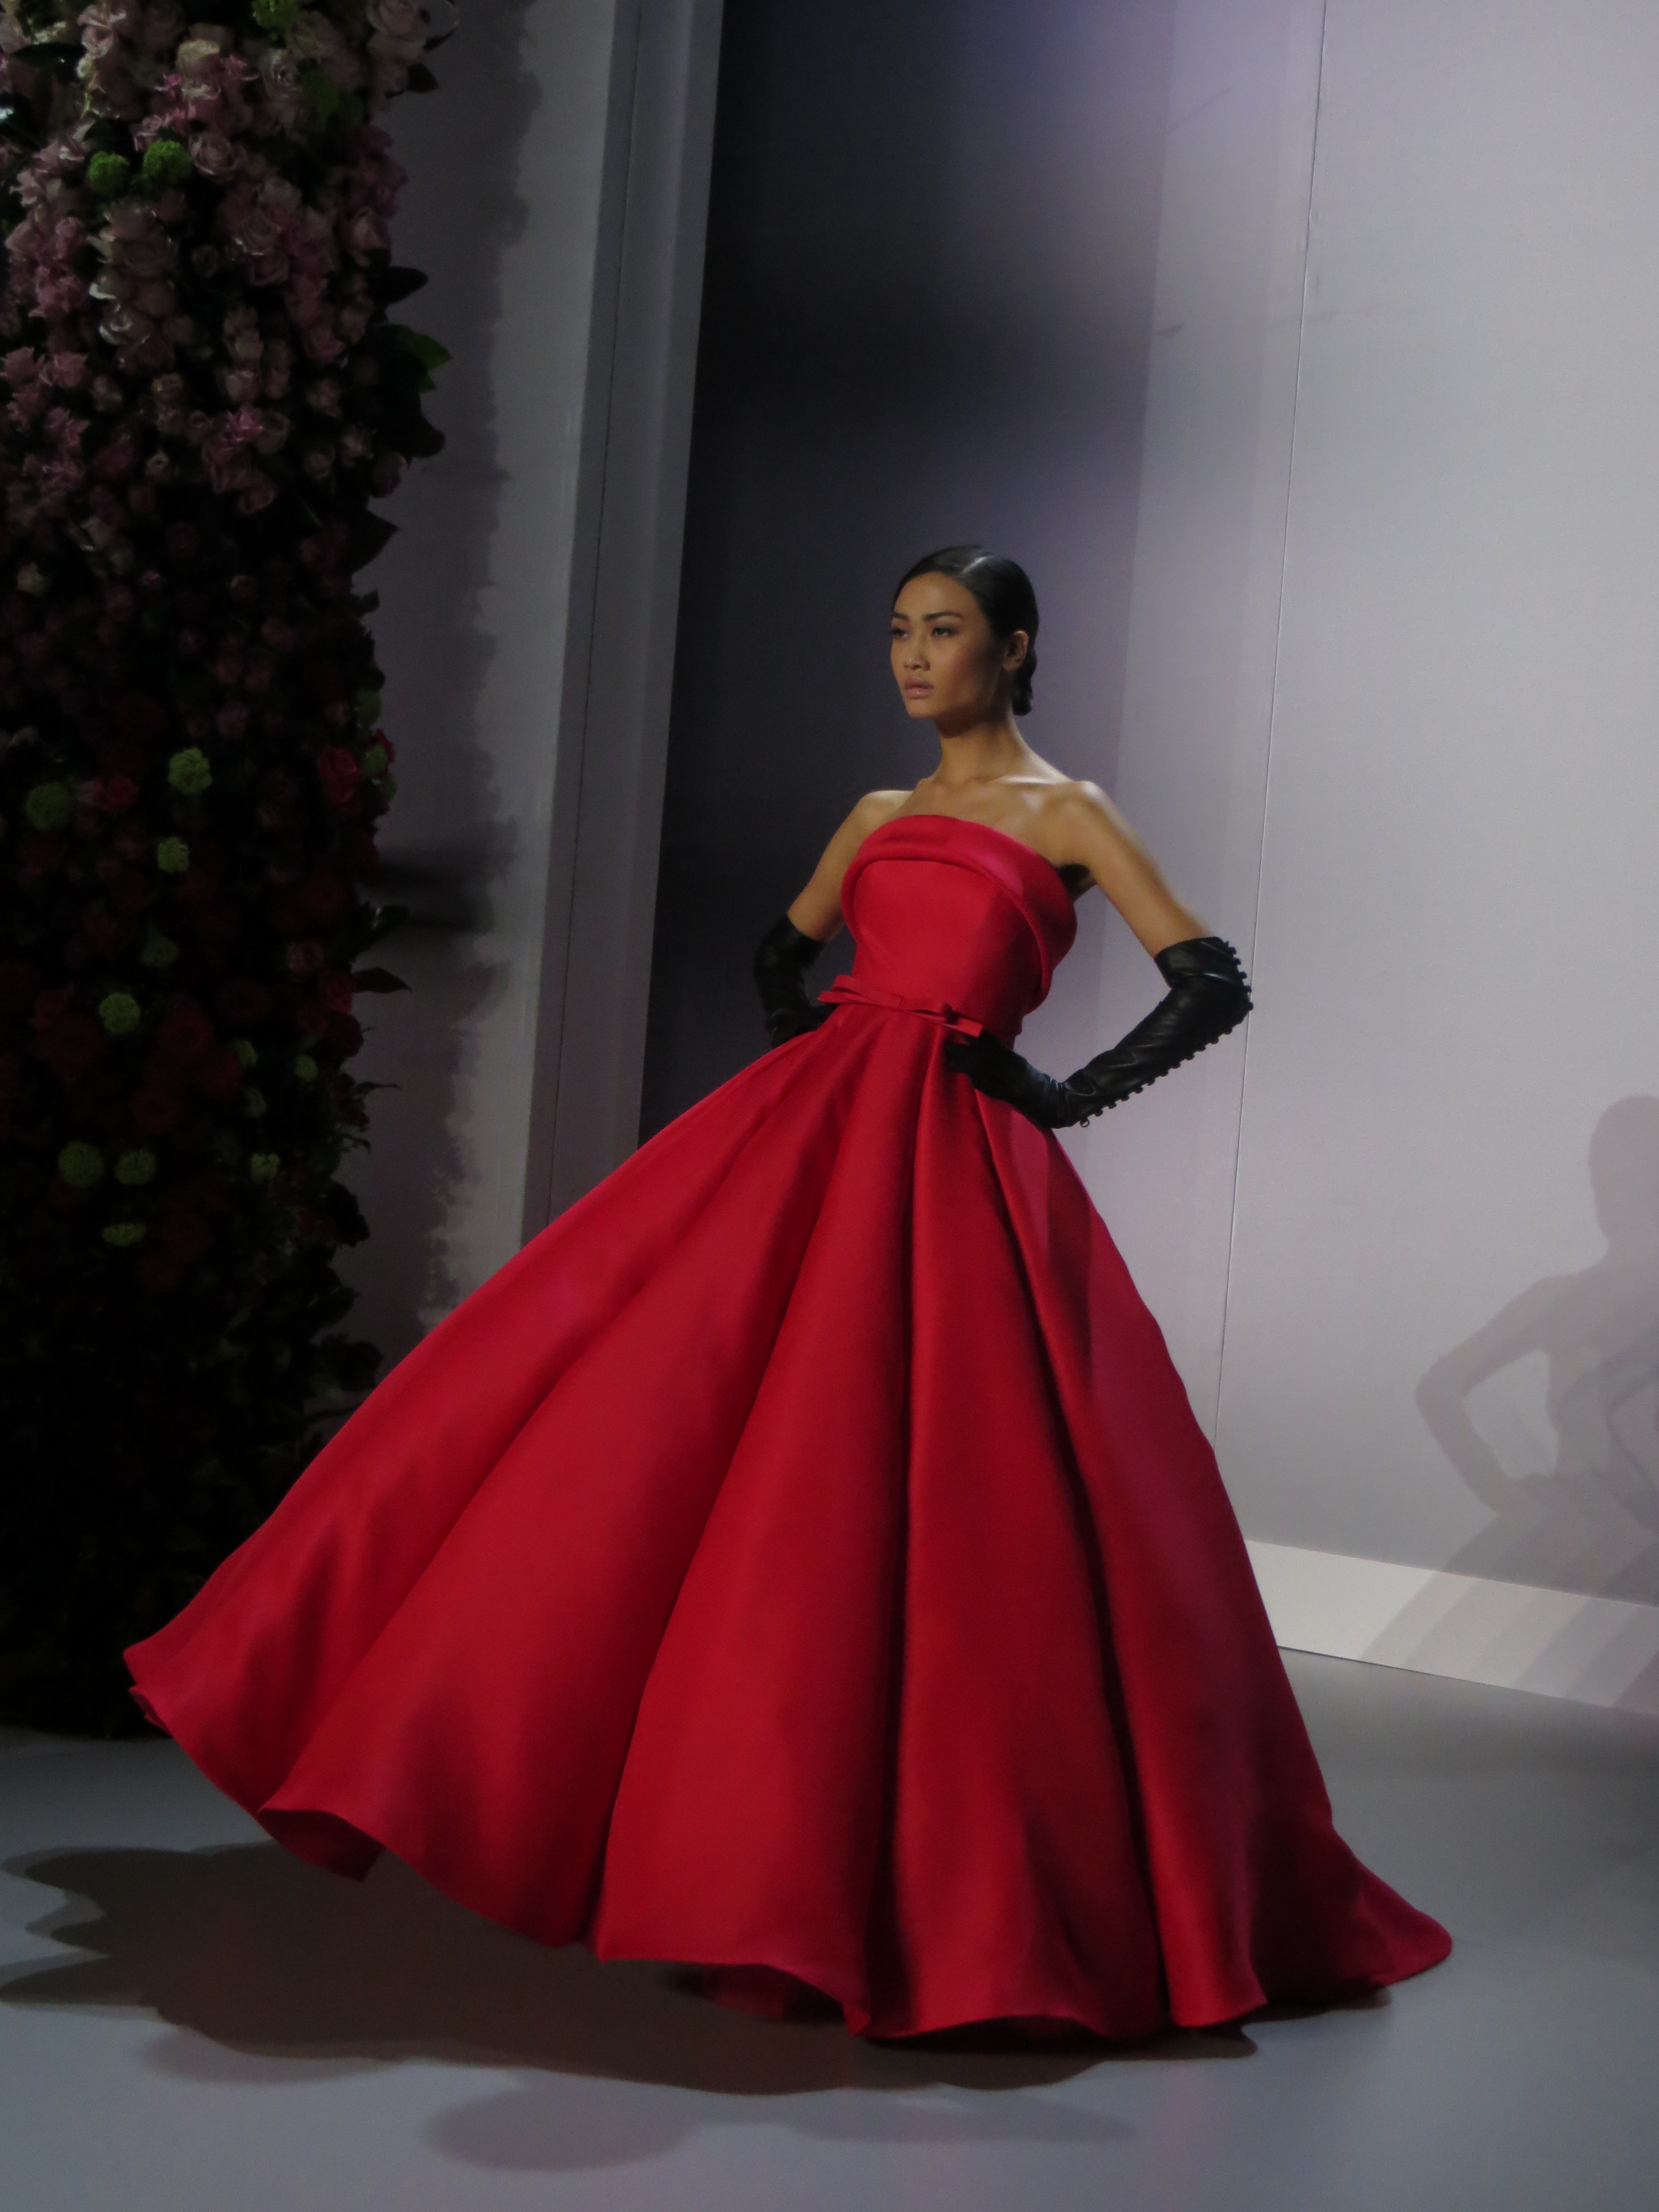 Ralph & Russo Fall 2020 Couture Fashion Show | Vogue